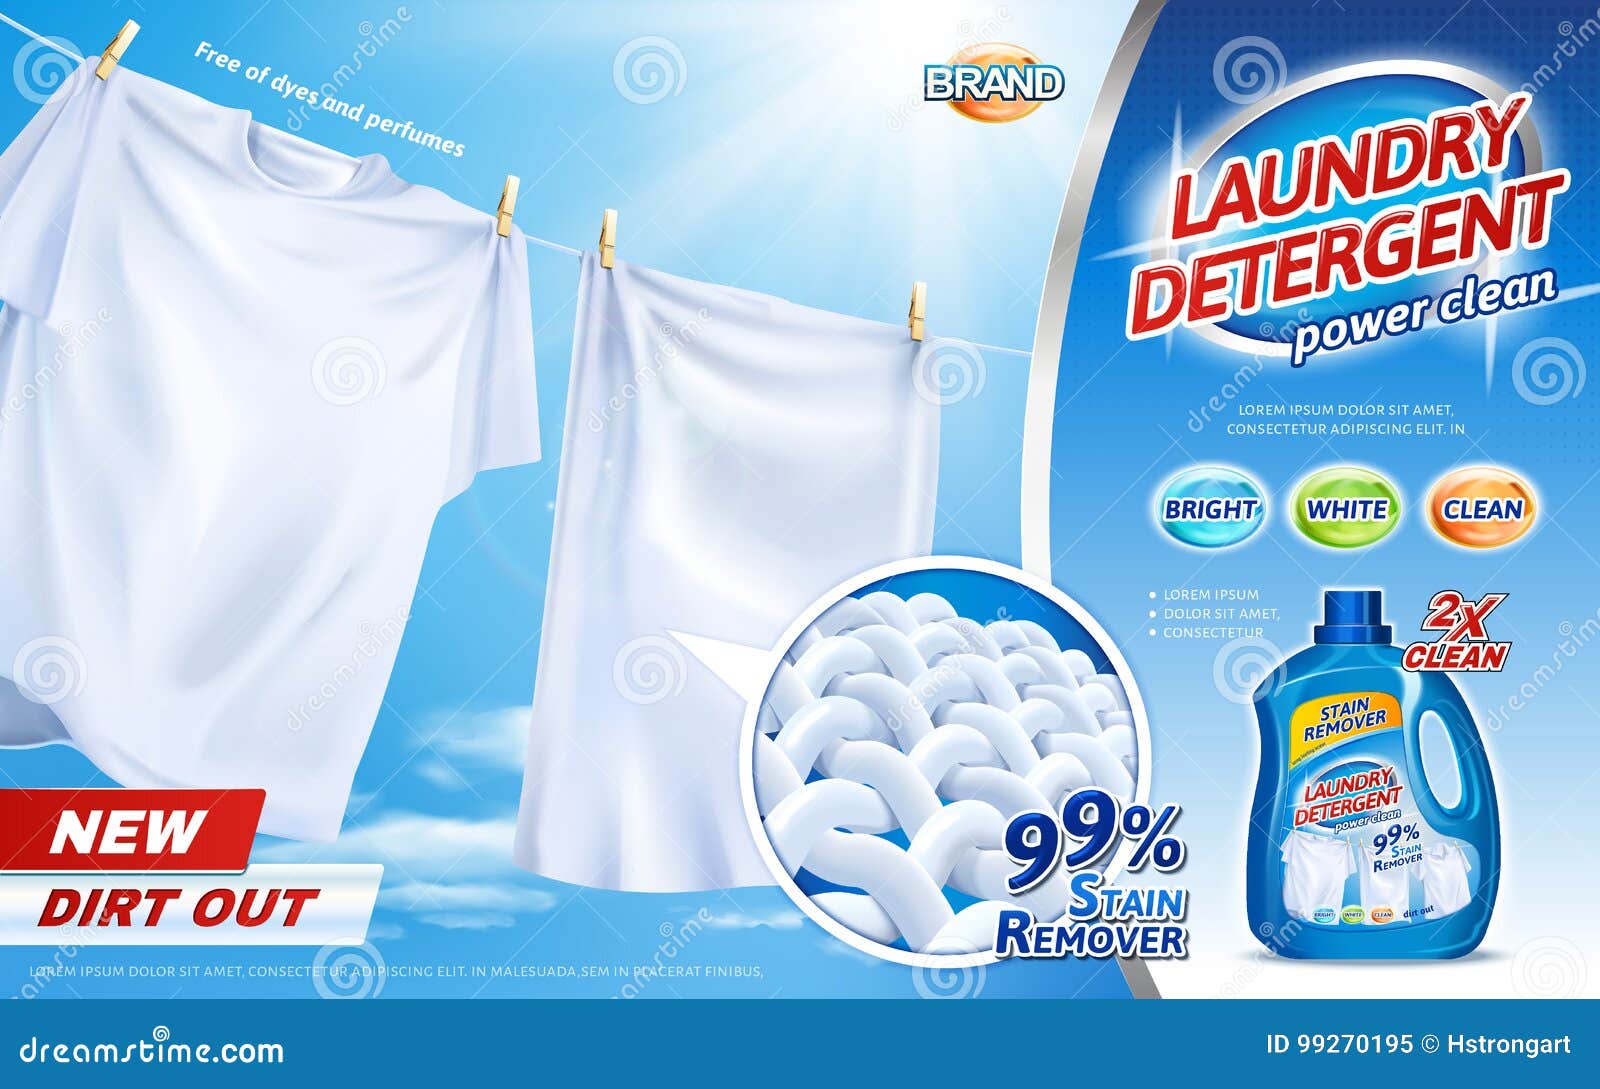 Laundry detergent ads stock vector. Illustration of hang - 99270195